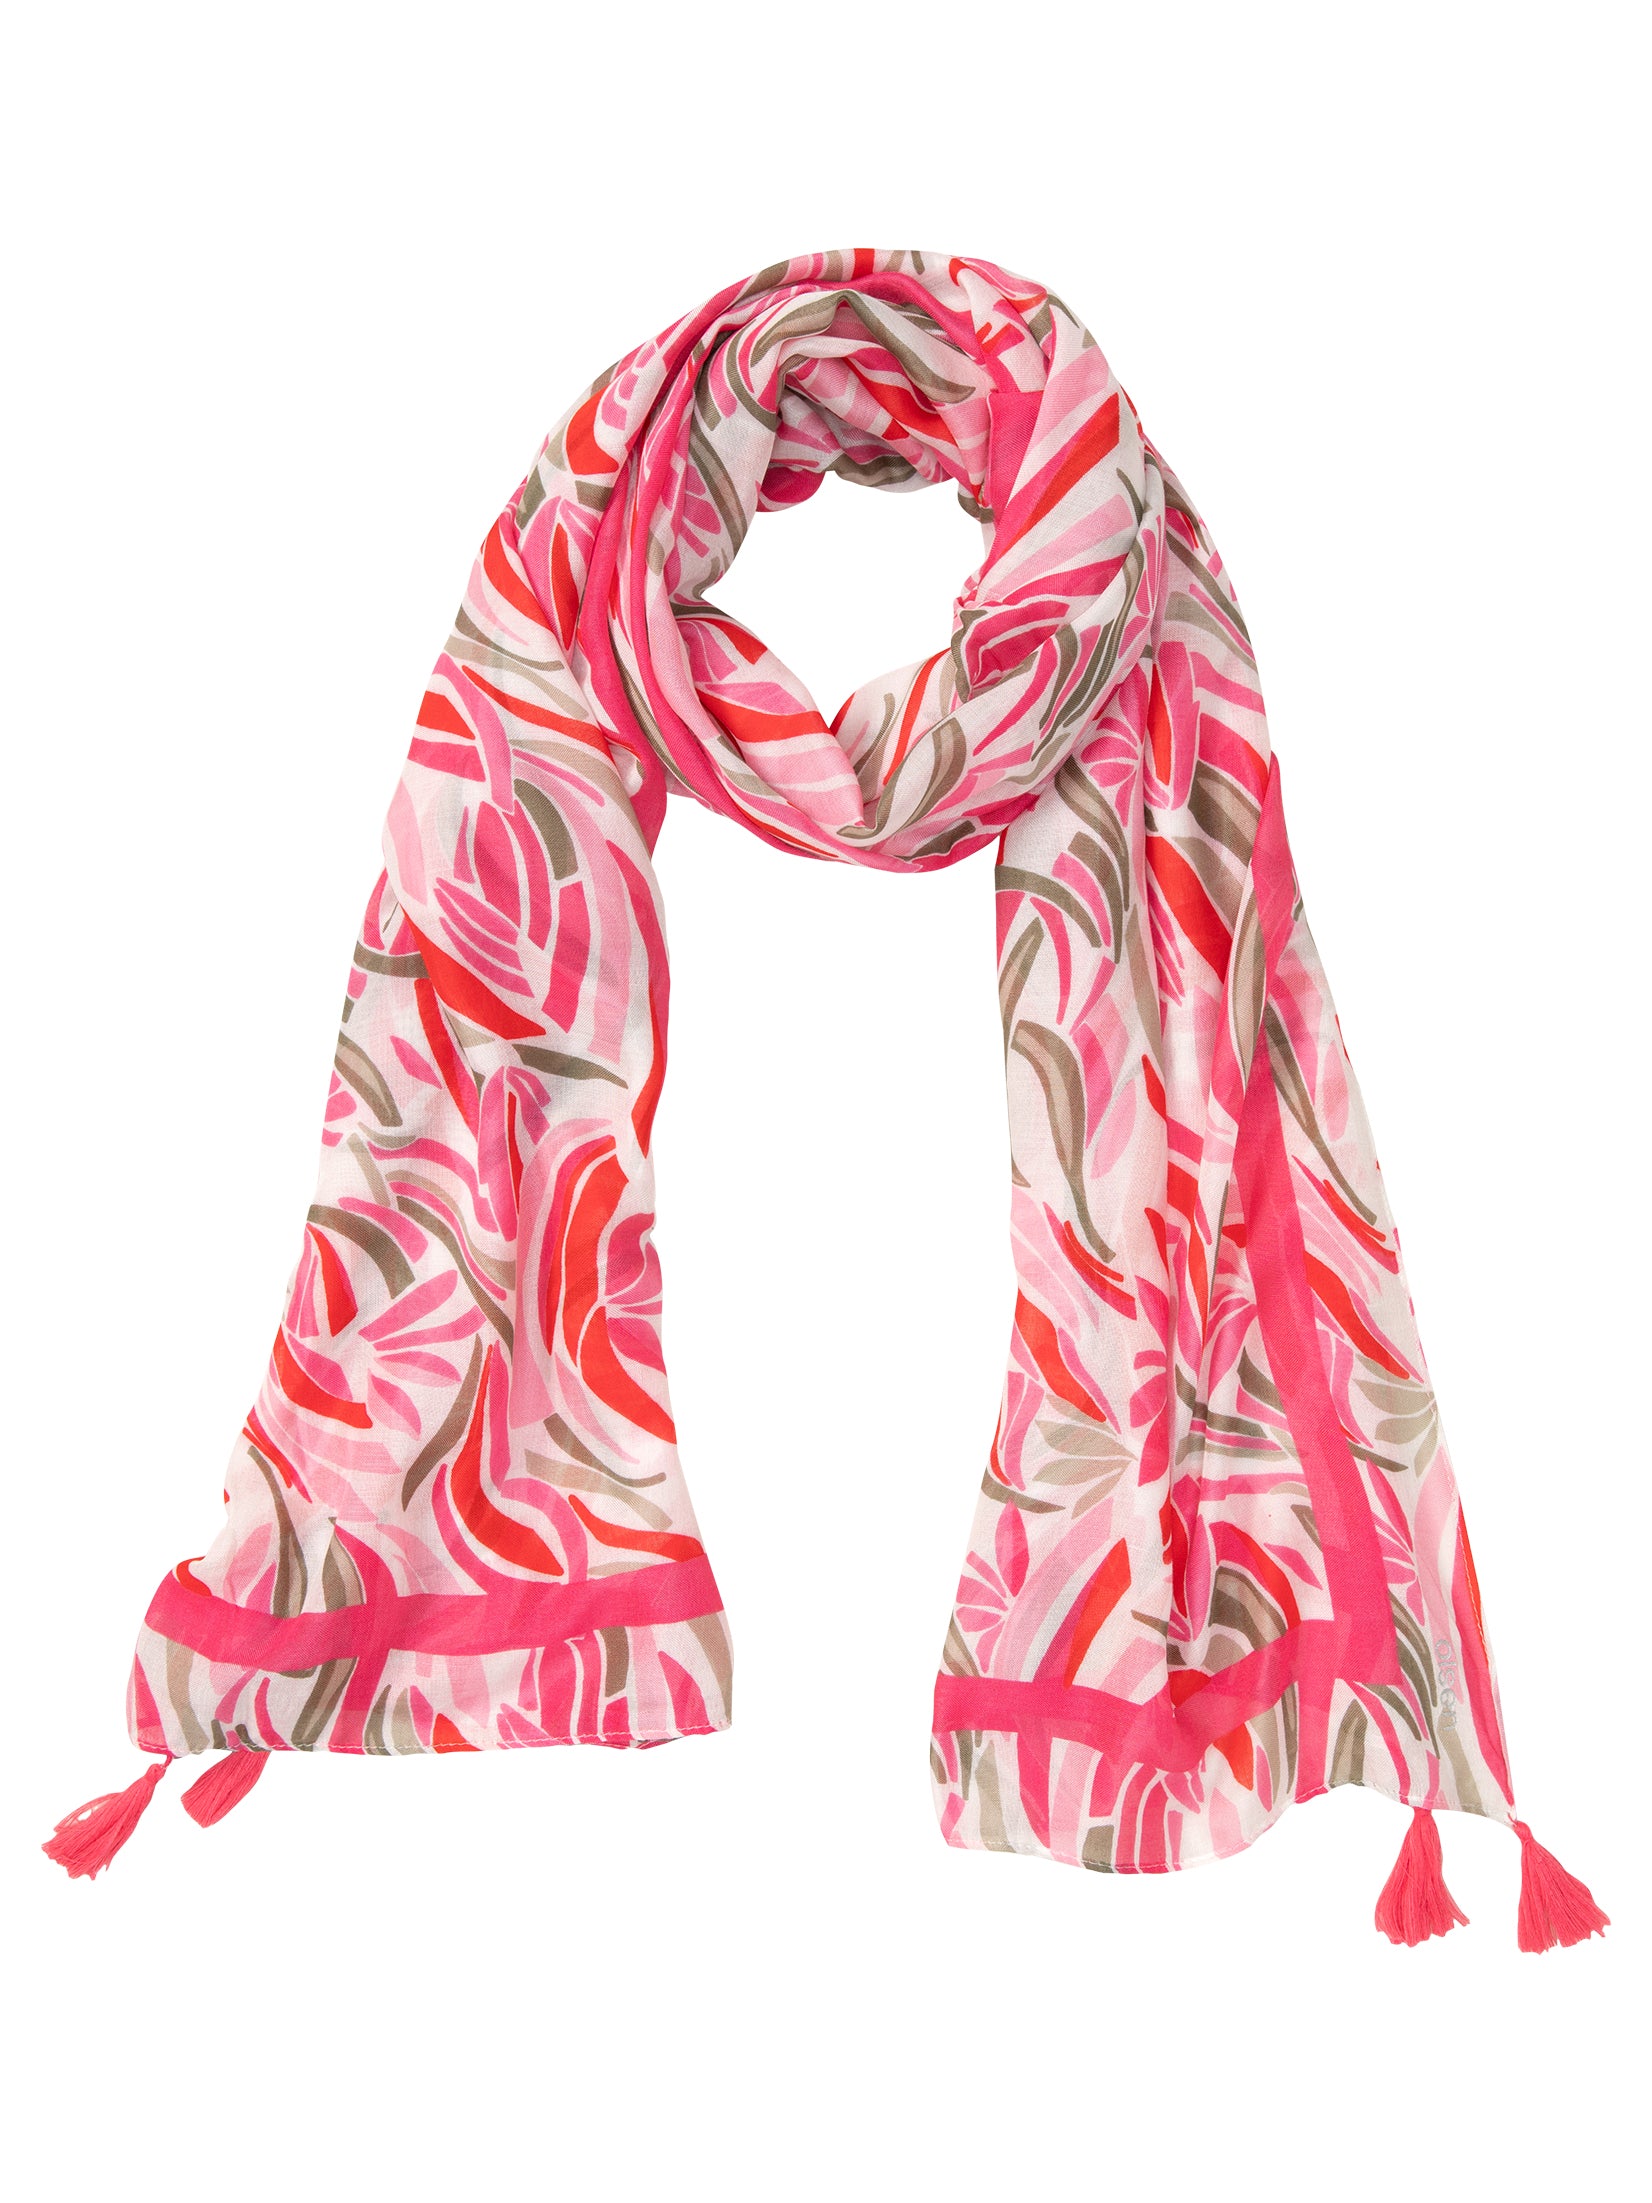 Woven Scarf in Paradise Pink